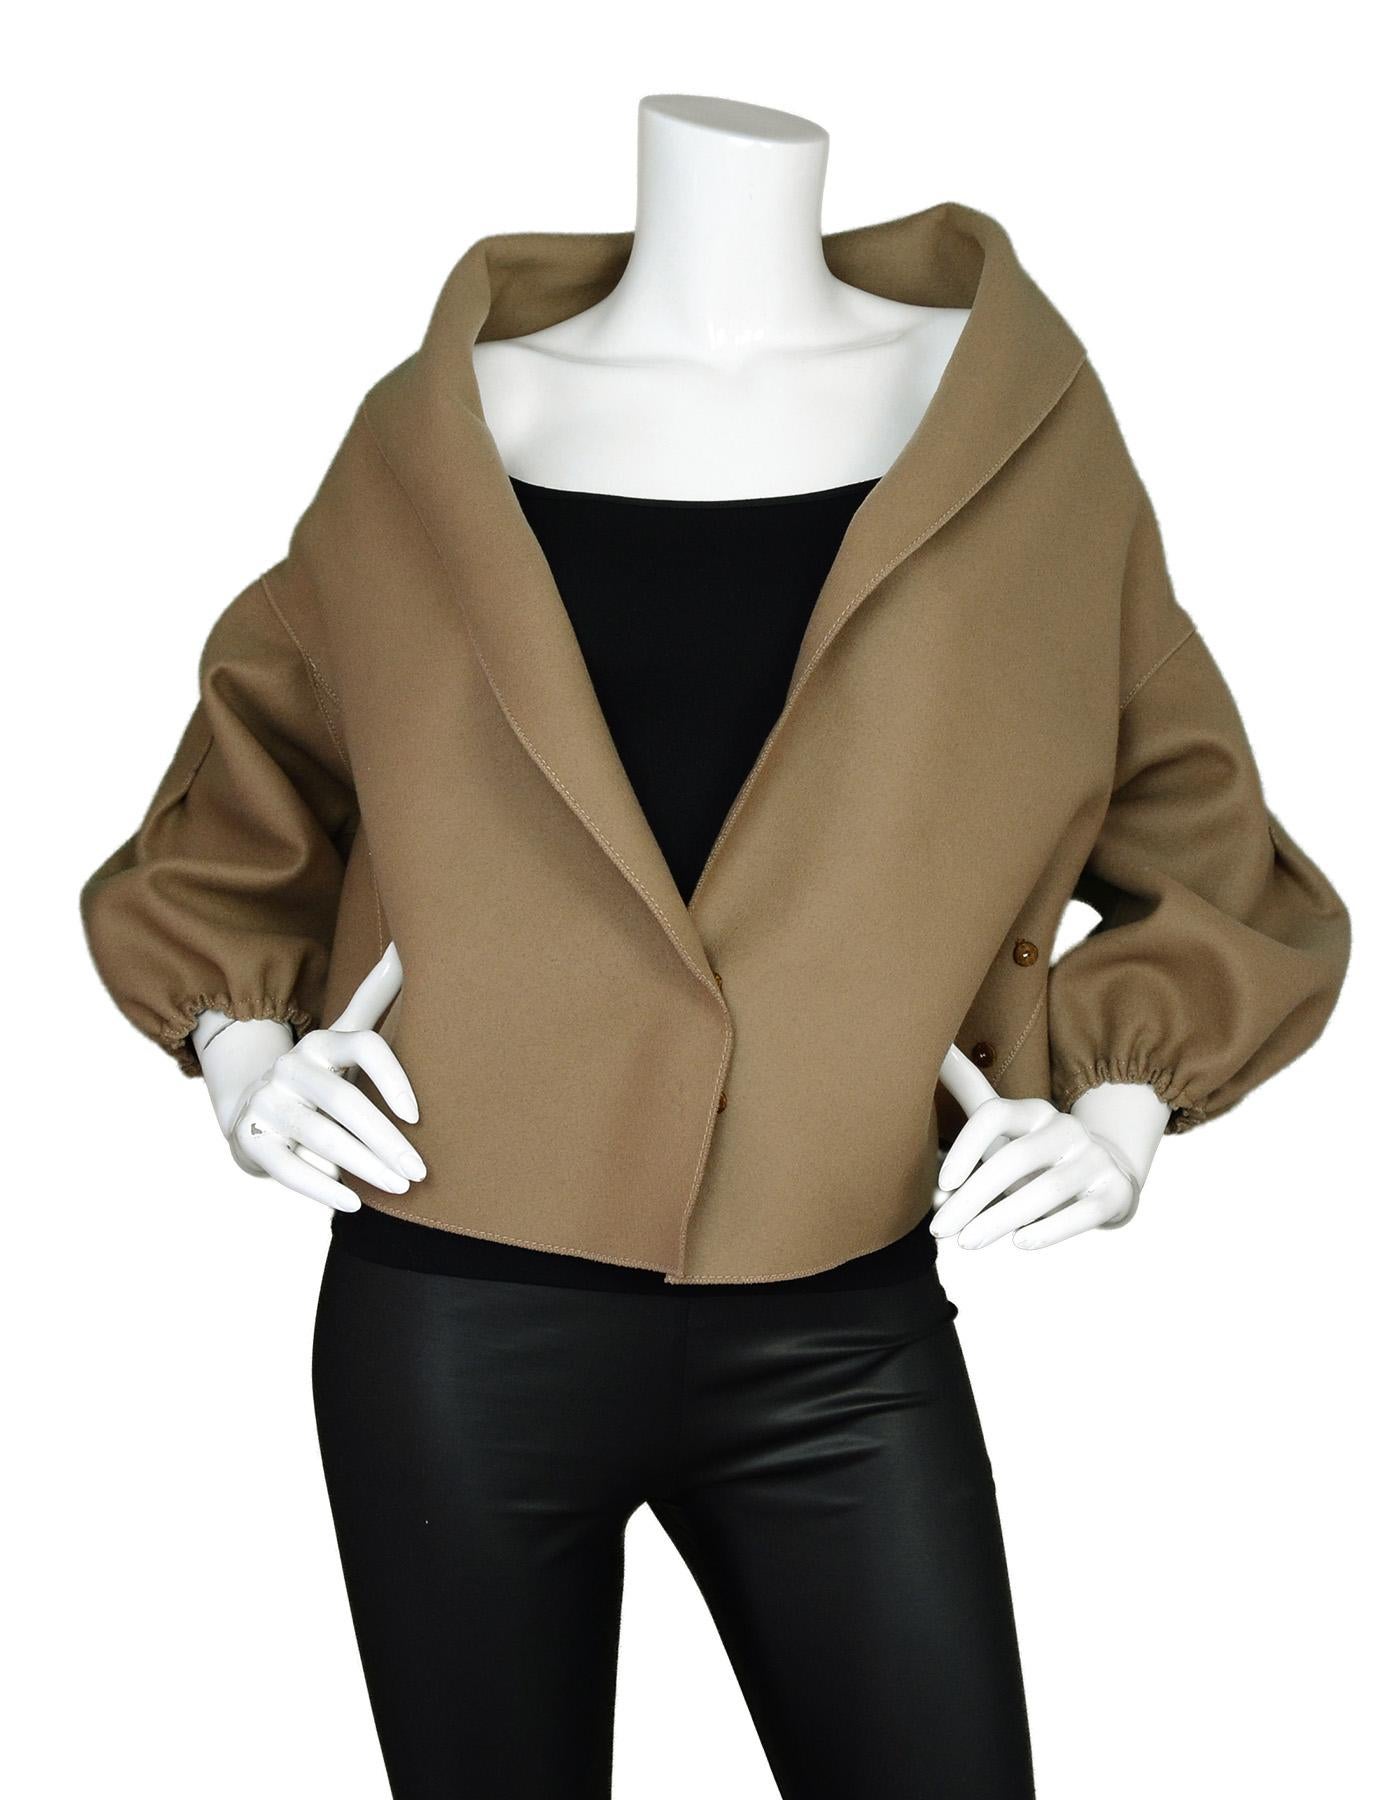 Prada Camel Wool 3/4 Sleeve Cropped Bolero Wrap Jacket Sz 38

Made In: Italy
Color: Camel
Materials: 89% wool, 11% nylon
Opening/Closure: Wrap front with two sets of snaps
Overall Condition: Excellent pre-owned condition 

Measurements: 
Shoulder To